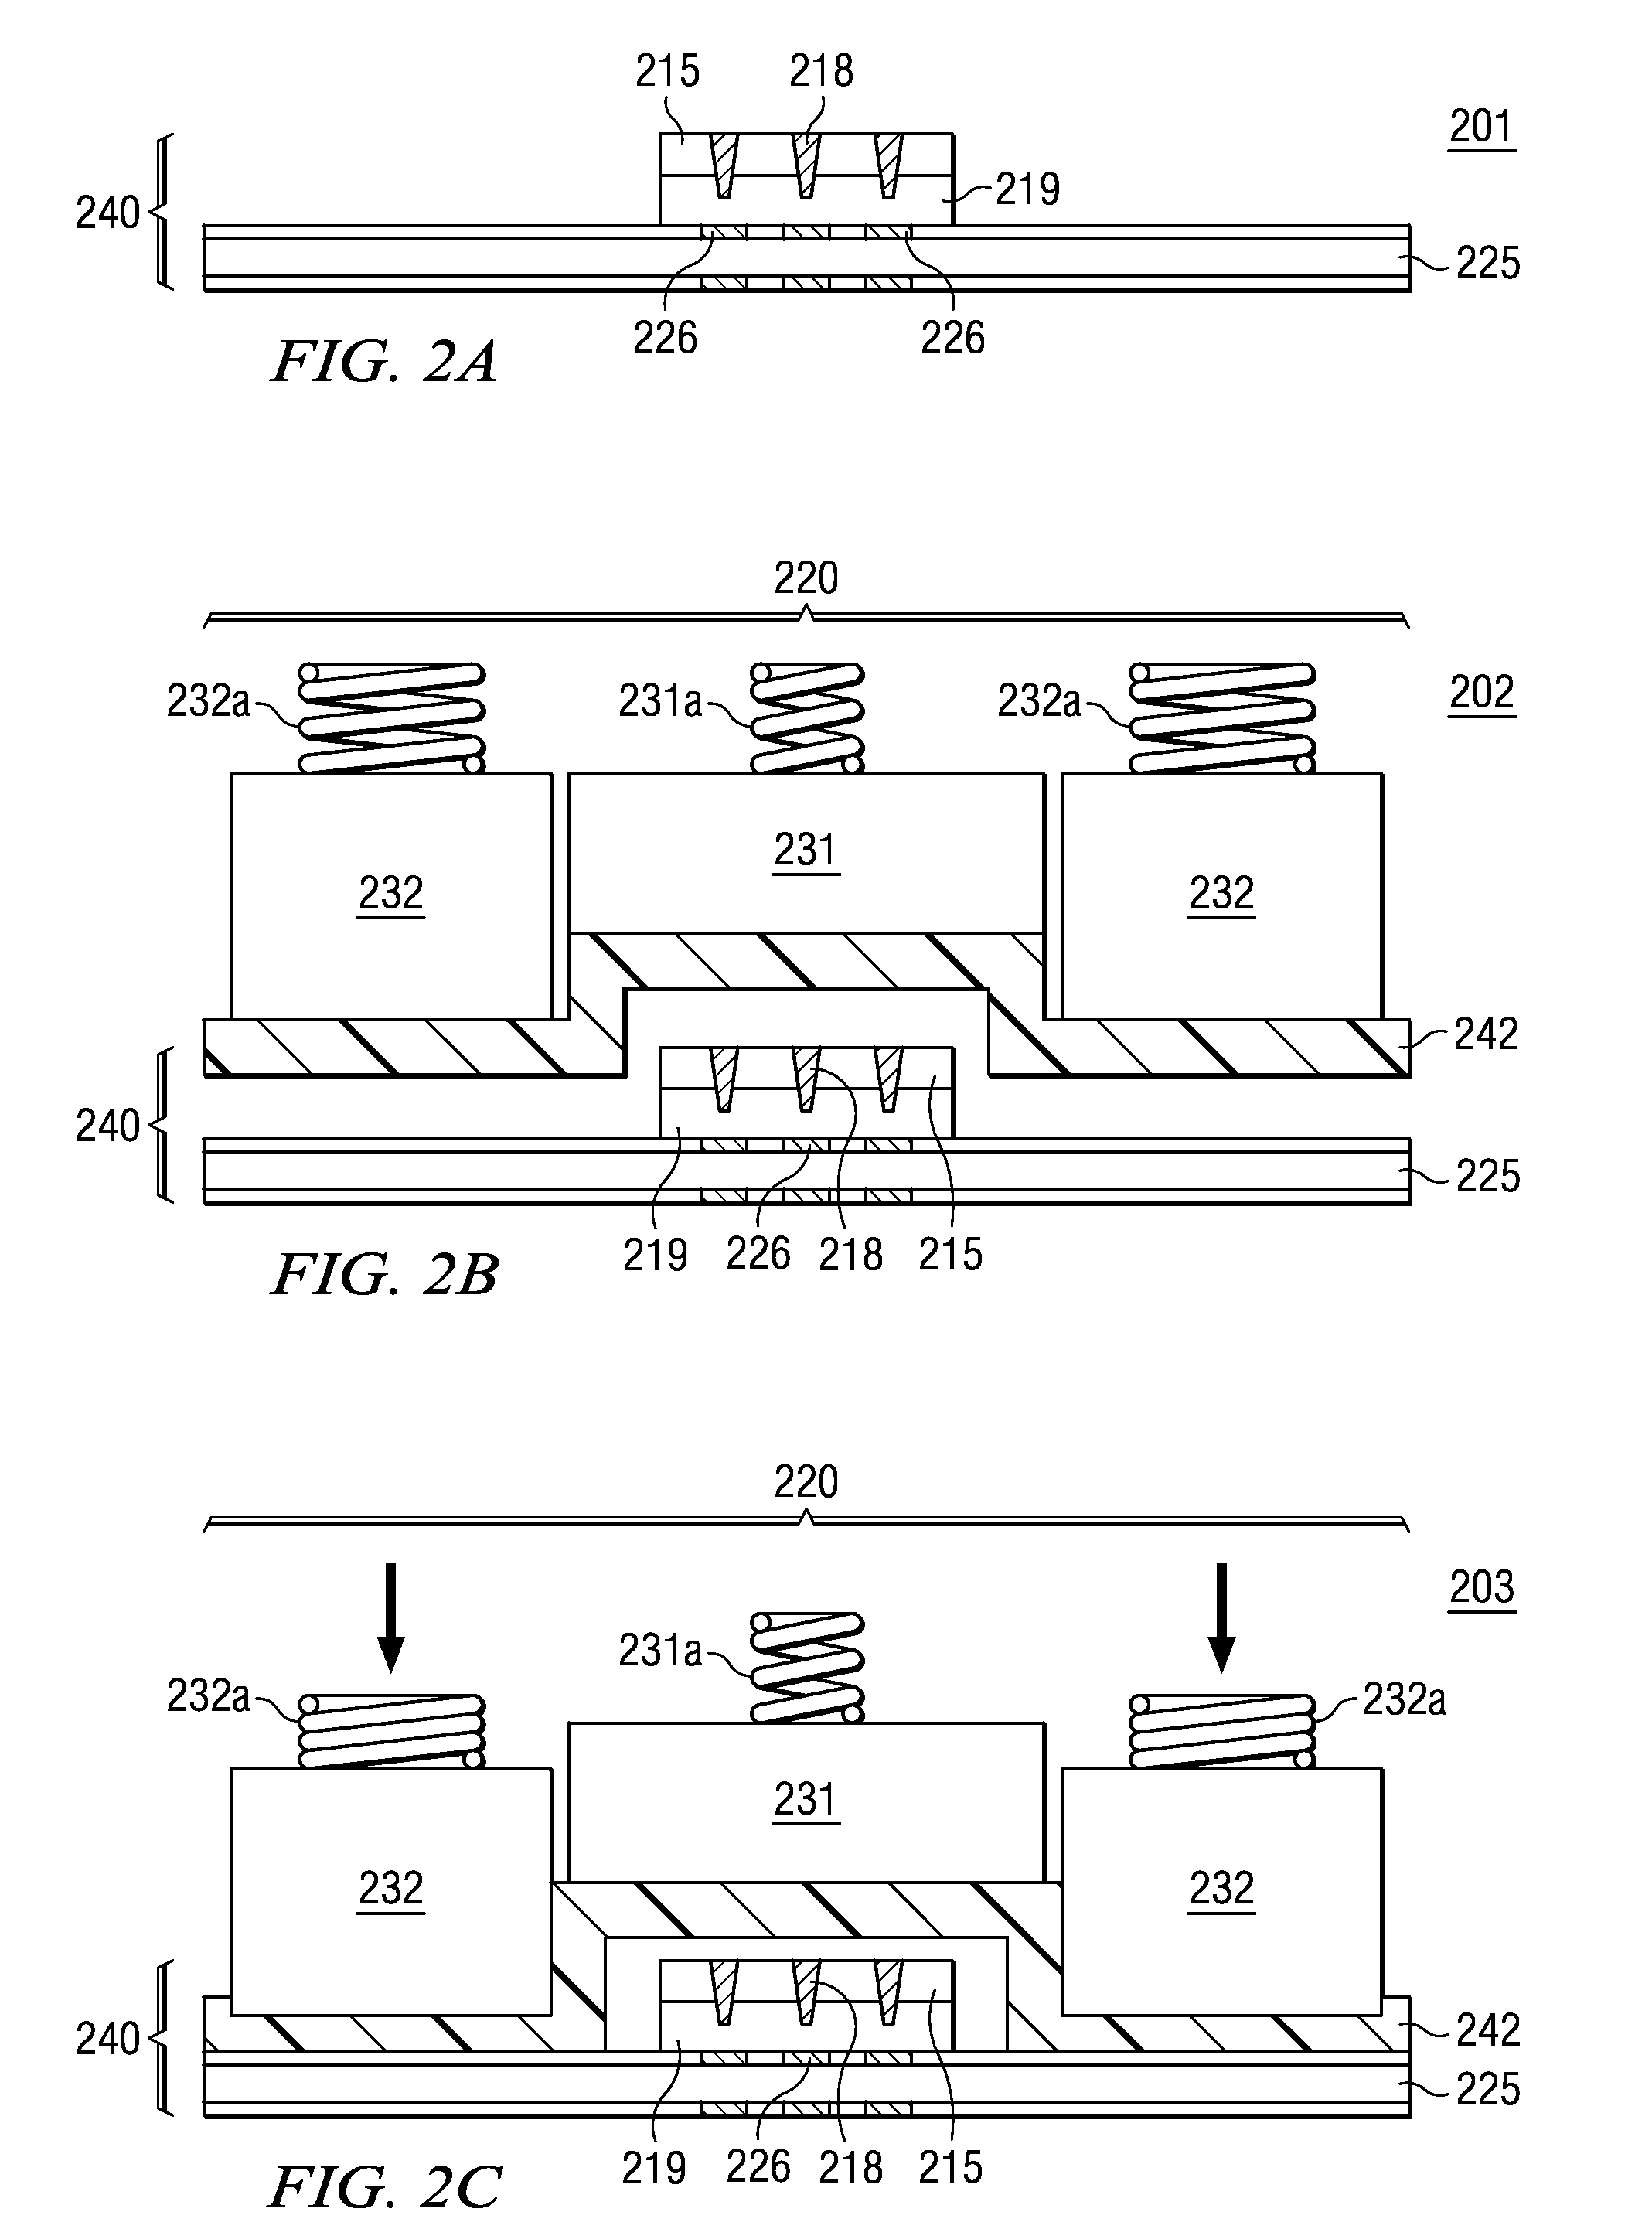 Combined metallic bonding and molding for electronic assemblies including void-reduced underfill